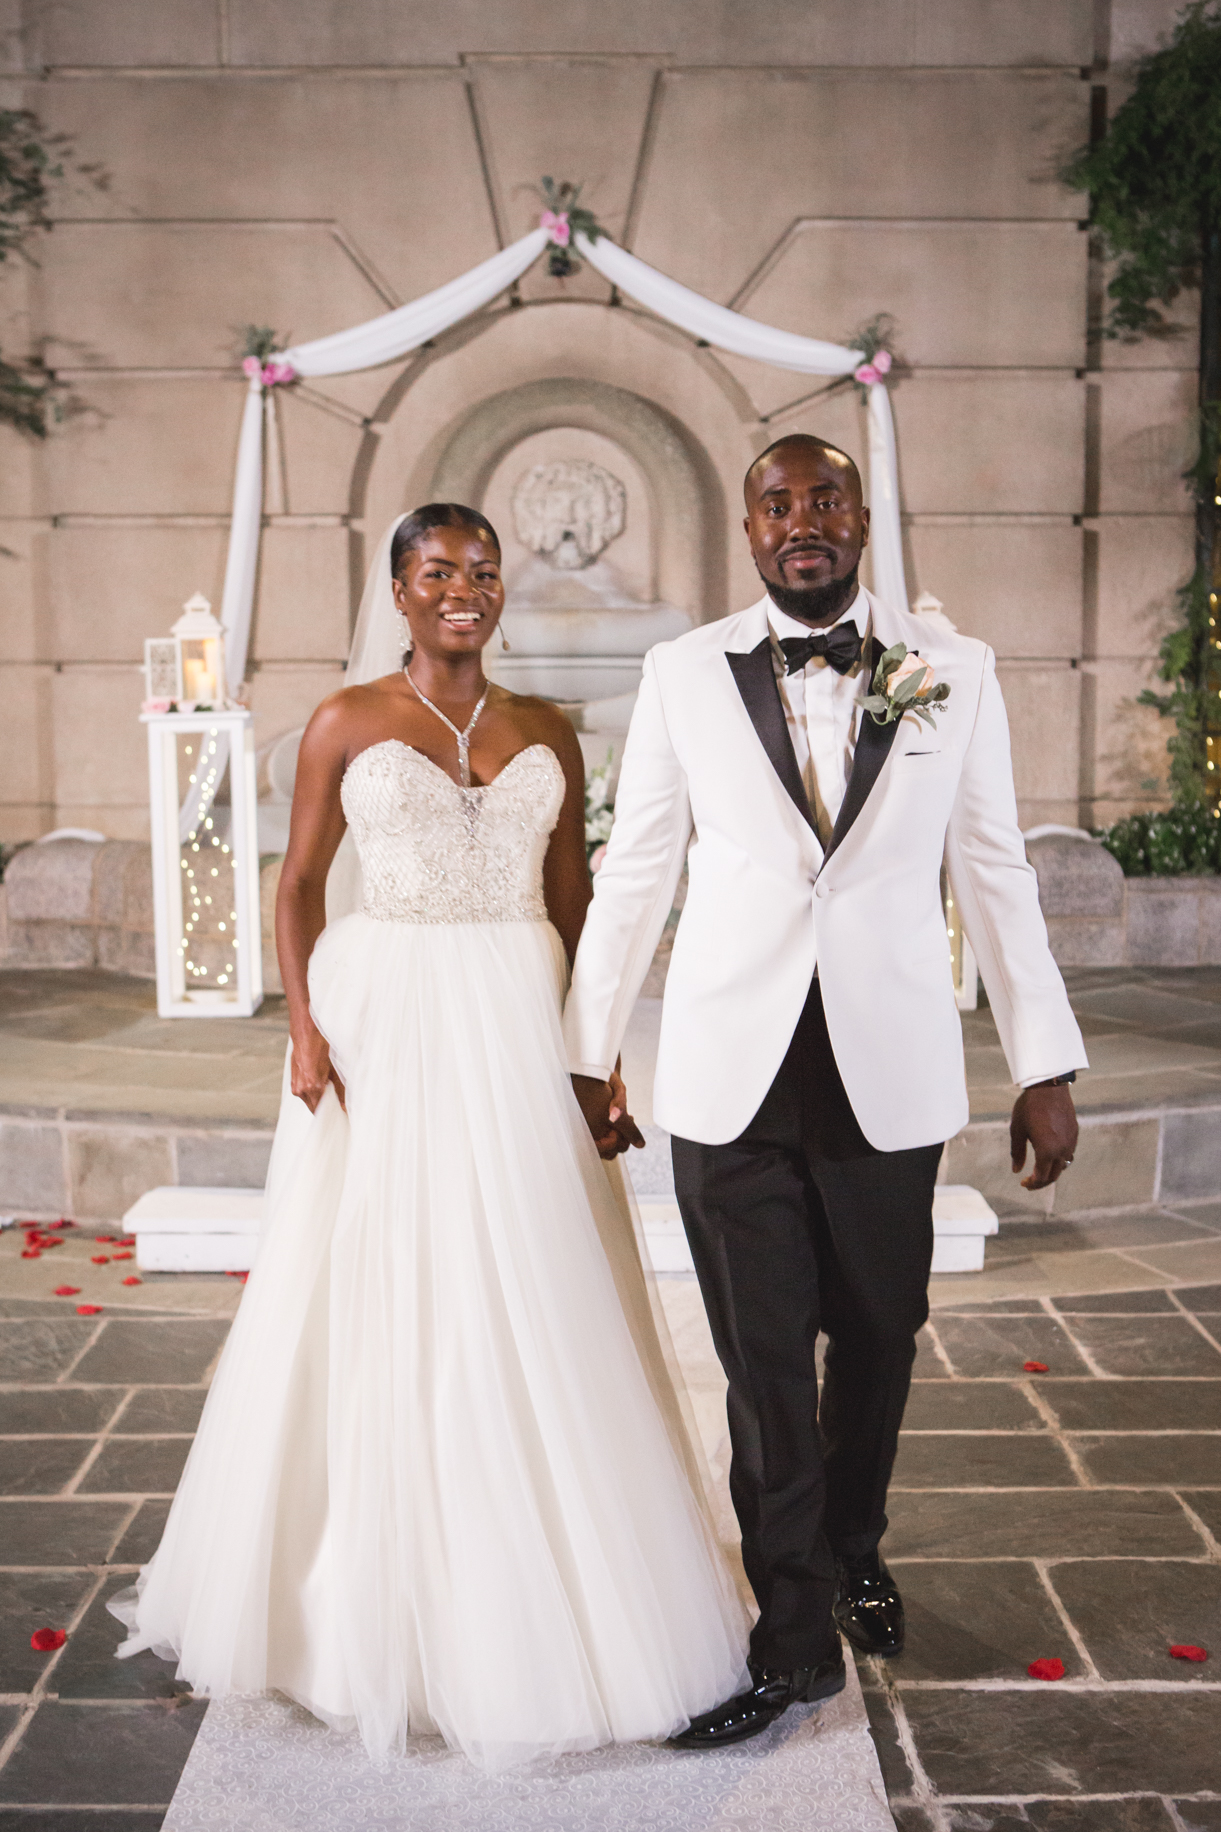 Married at First Sight Meka and Michael